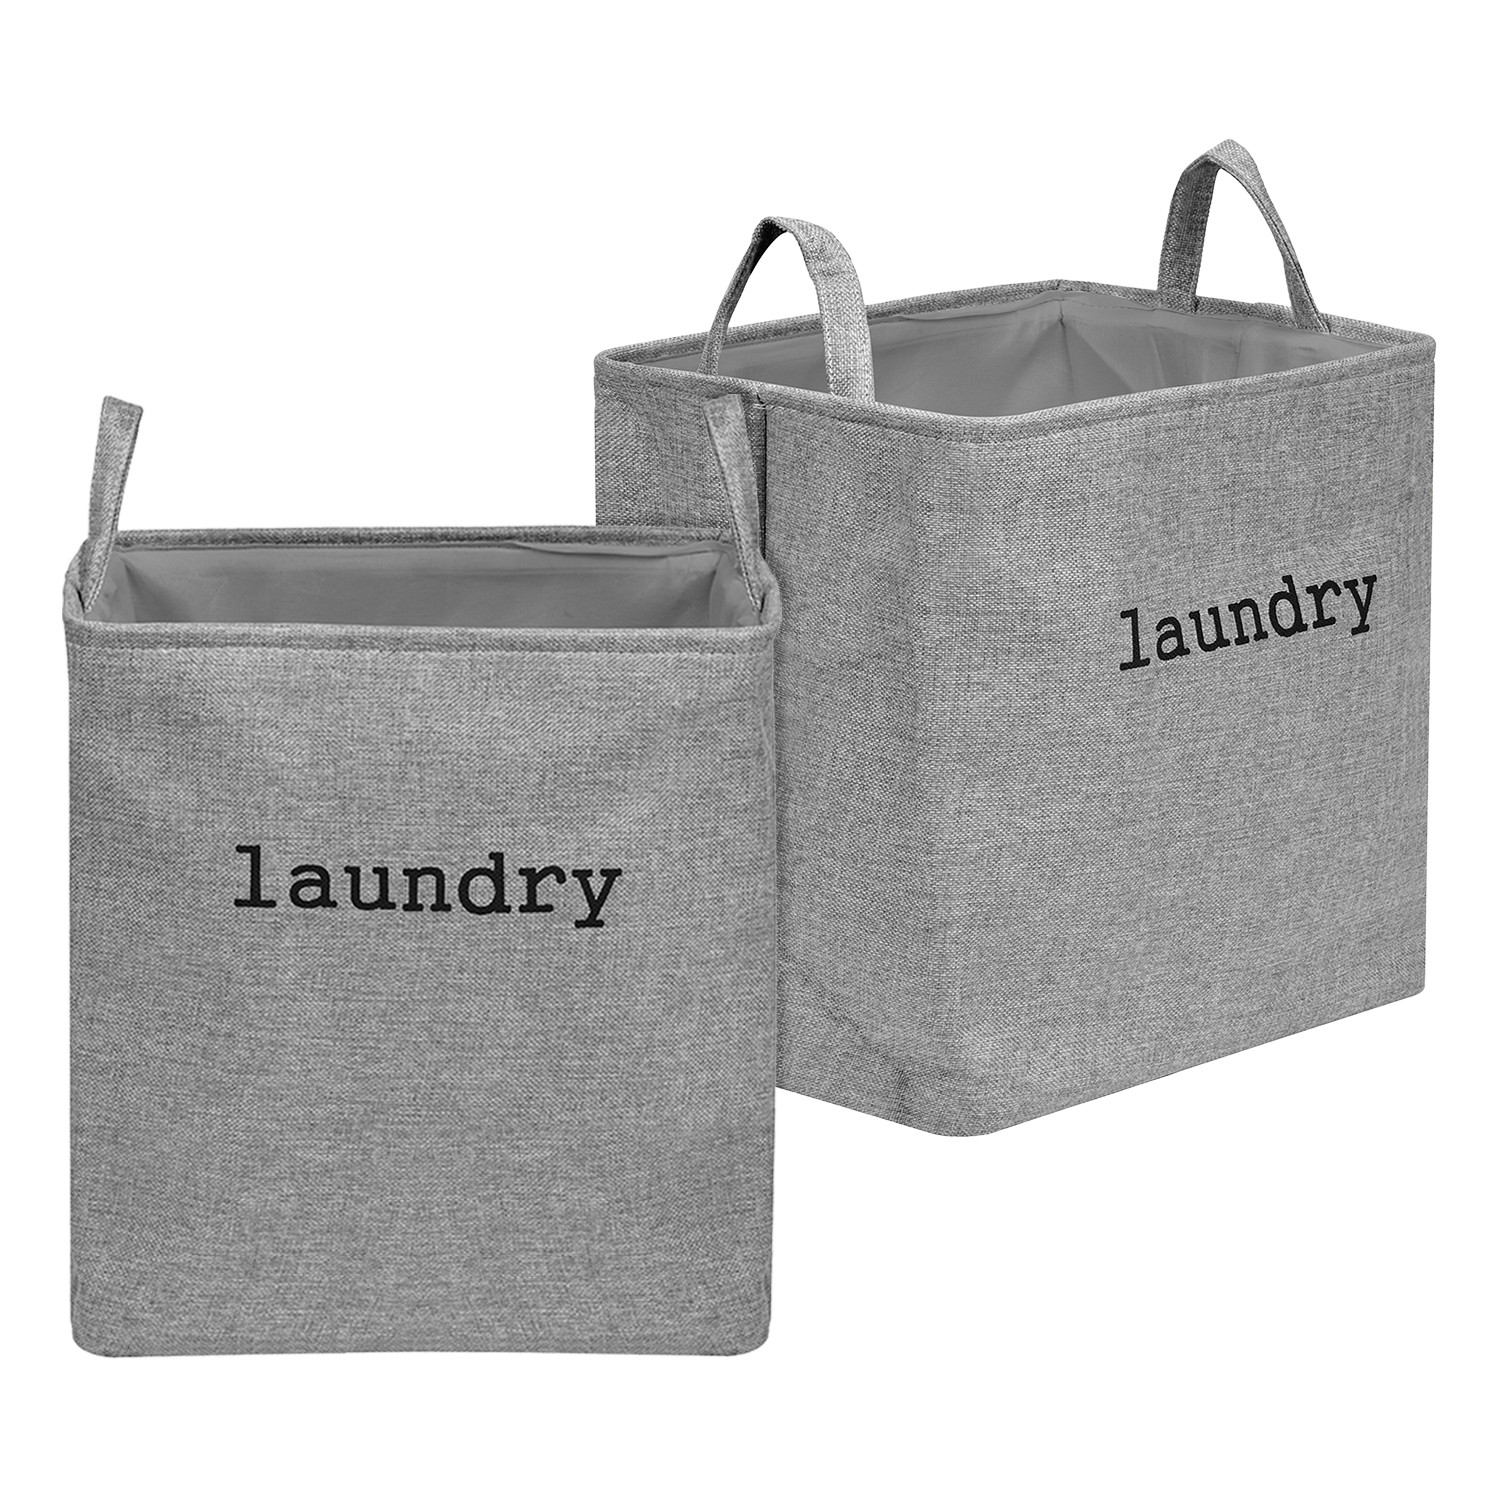 Kuber Industries Laundry Basket | Square Foldable Laundry Basket | Jute Storage Bag with Handles | Clothes Basket for Home | Toy Storage Basket | 40 LTR | Gray